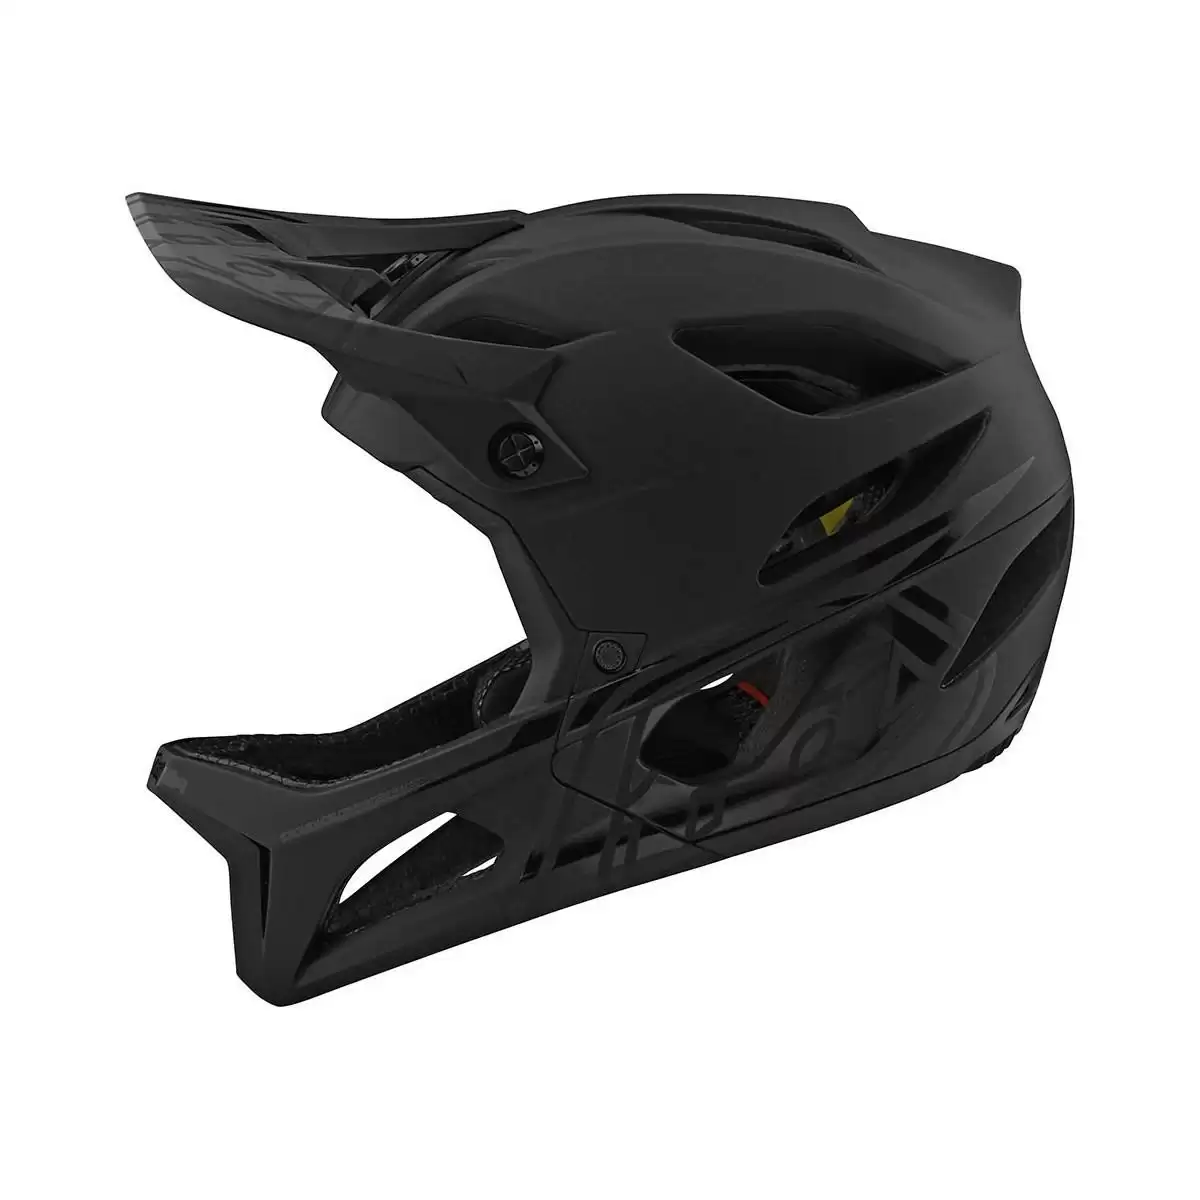 Full Face Helmet Stage MIPS Stealth Midnight Black Size XS/S (54-56cm) - image